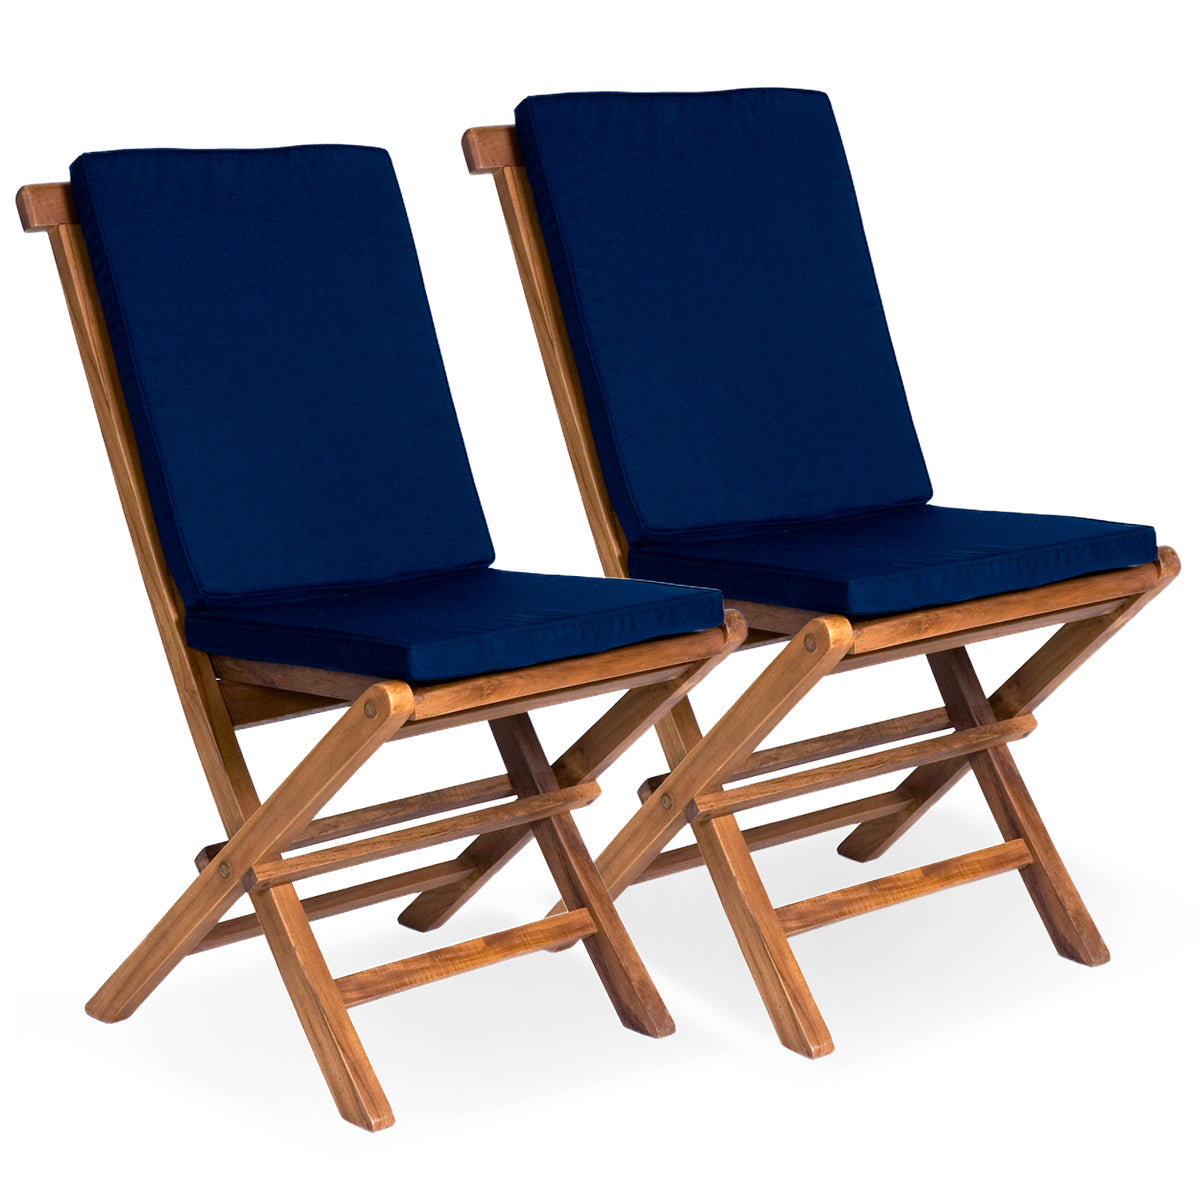 Teak Folding Chairs with Blue Cushions